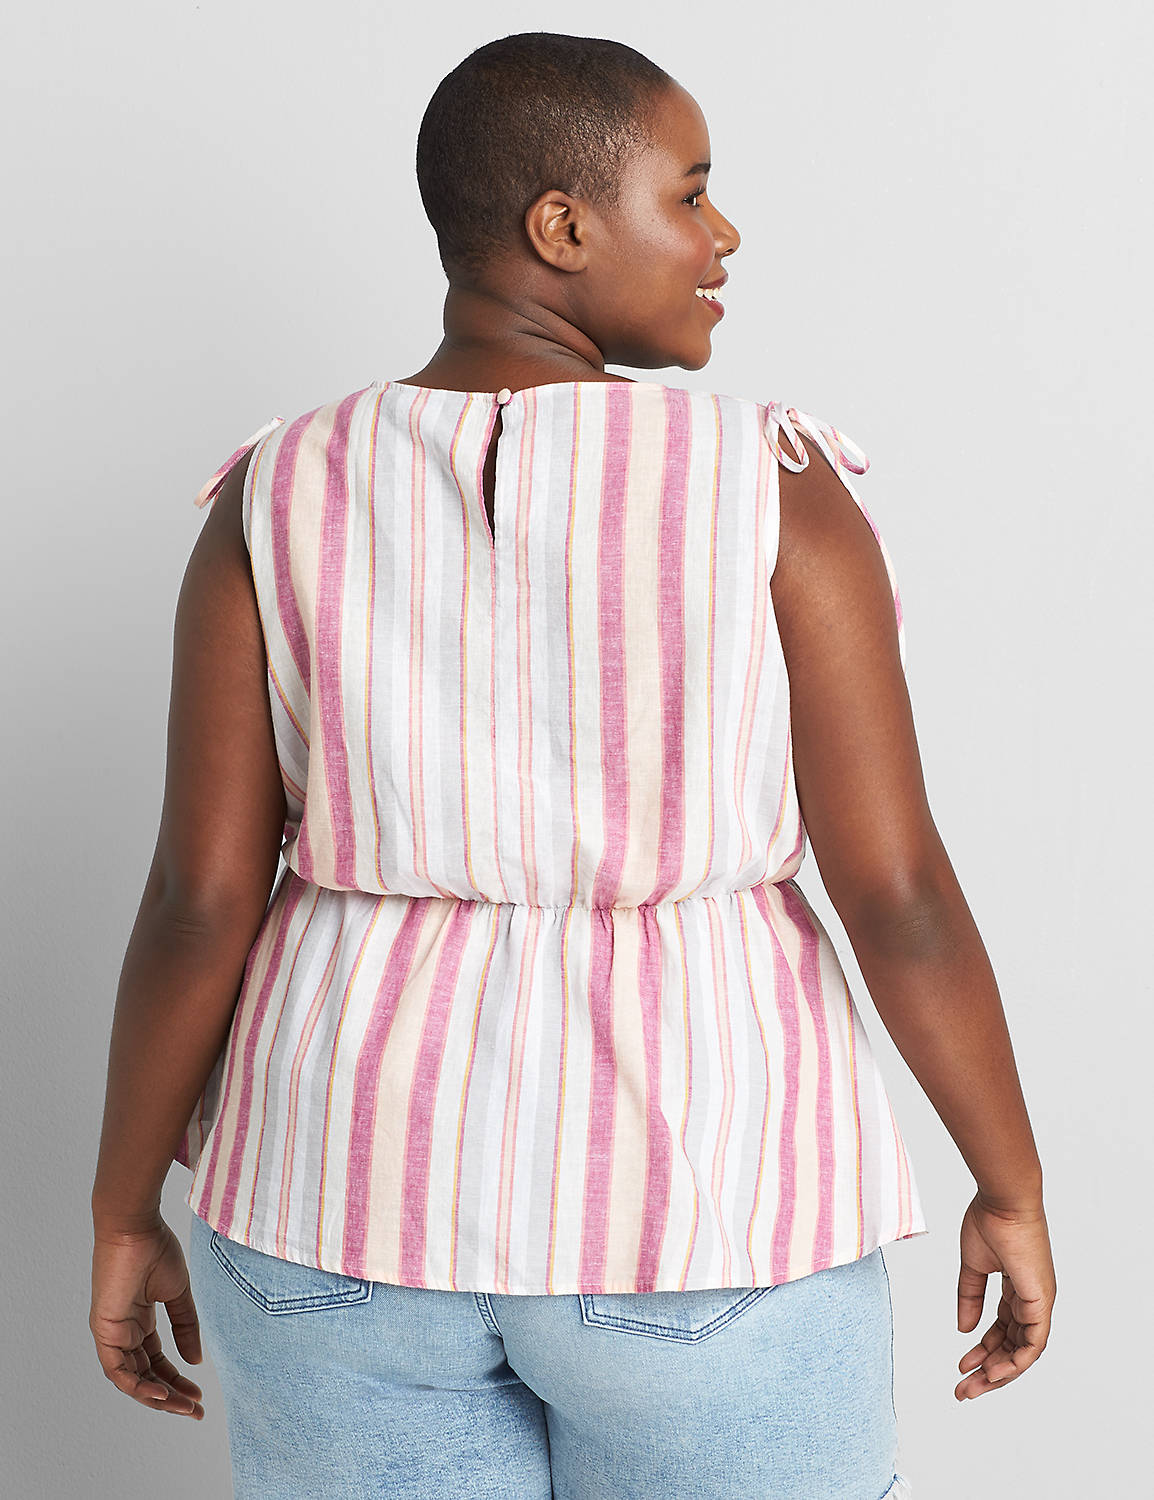 Striped Tie-Shoulder Top Product Image 2